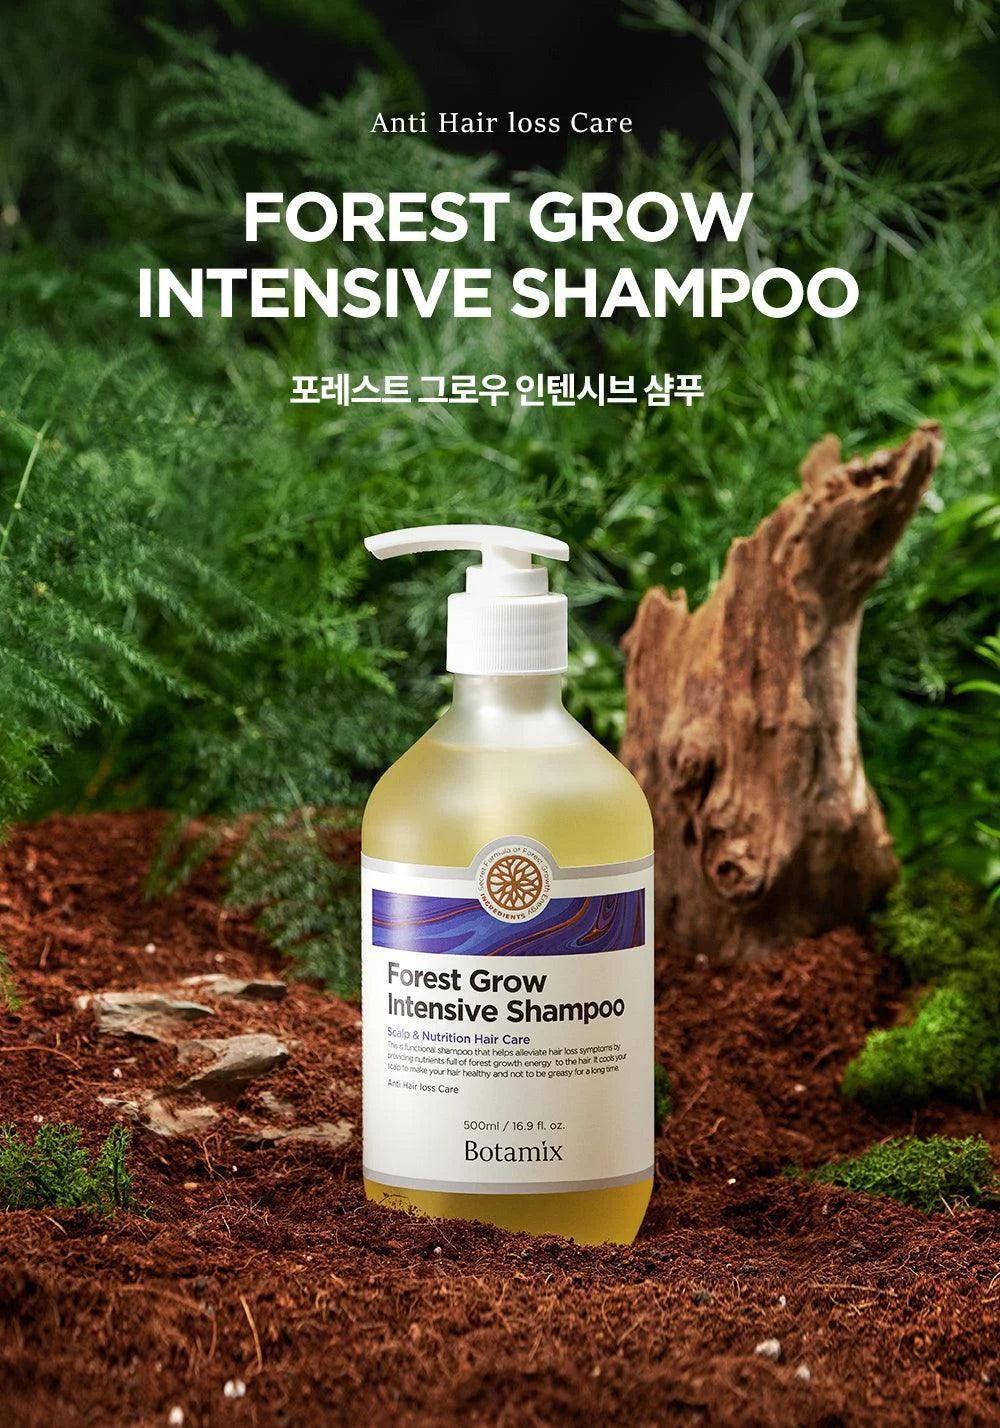 Botamix Forest Grow Intensive Shampoo 500ml by Love Nature